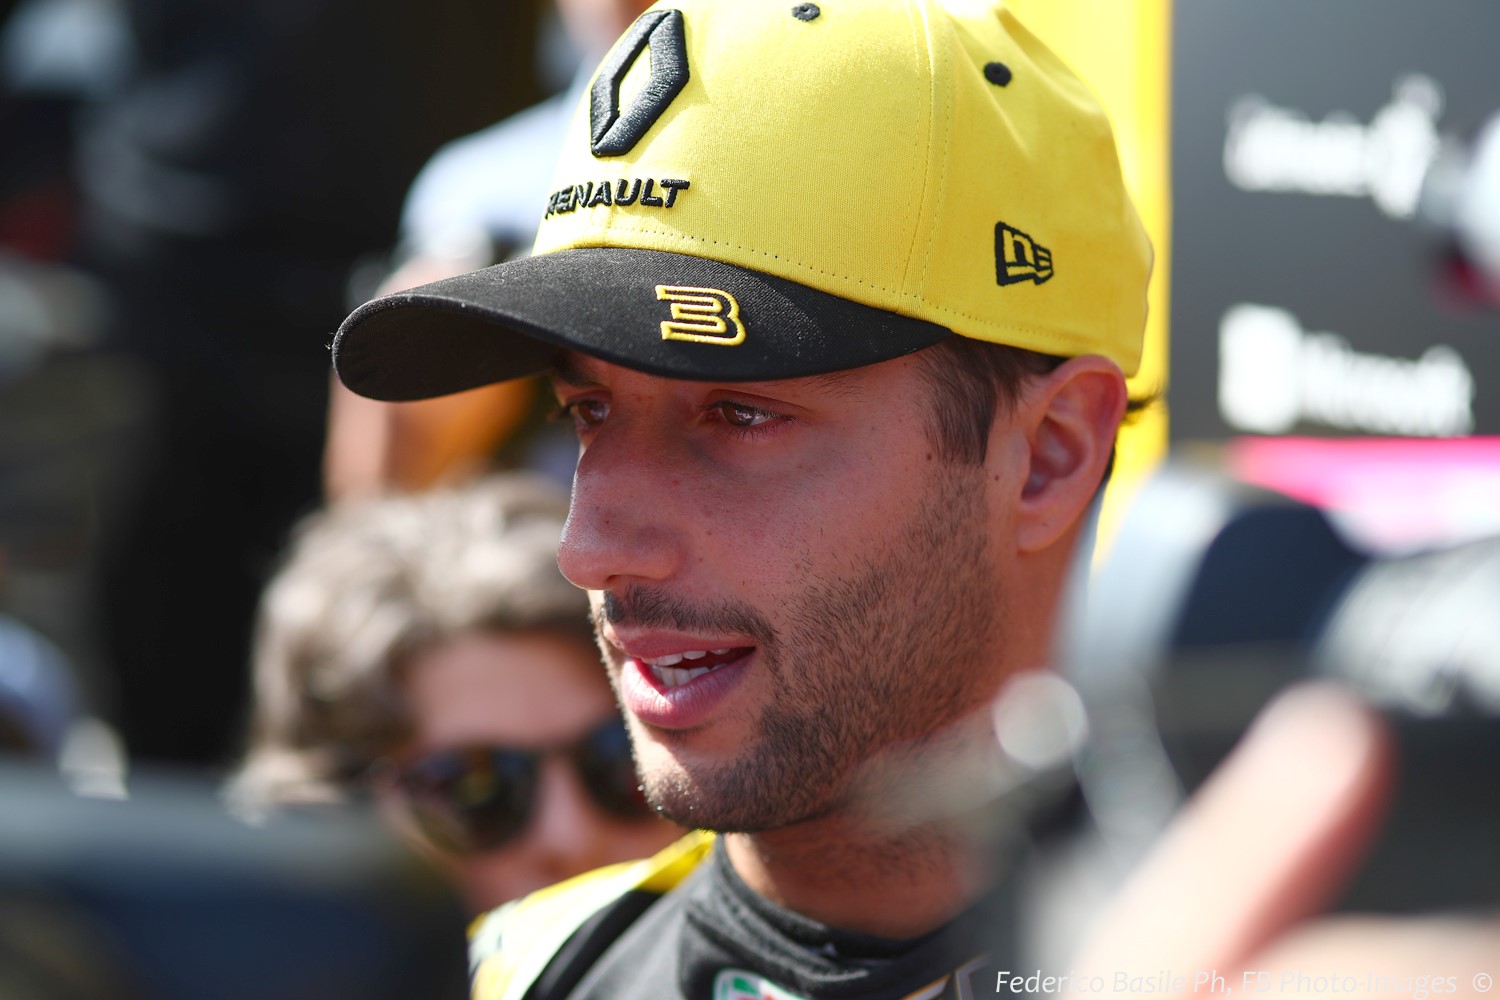 Daniel Ricciardo loves the paycheck he gets from Renault